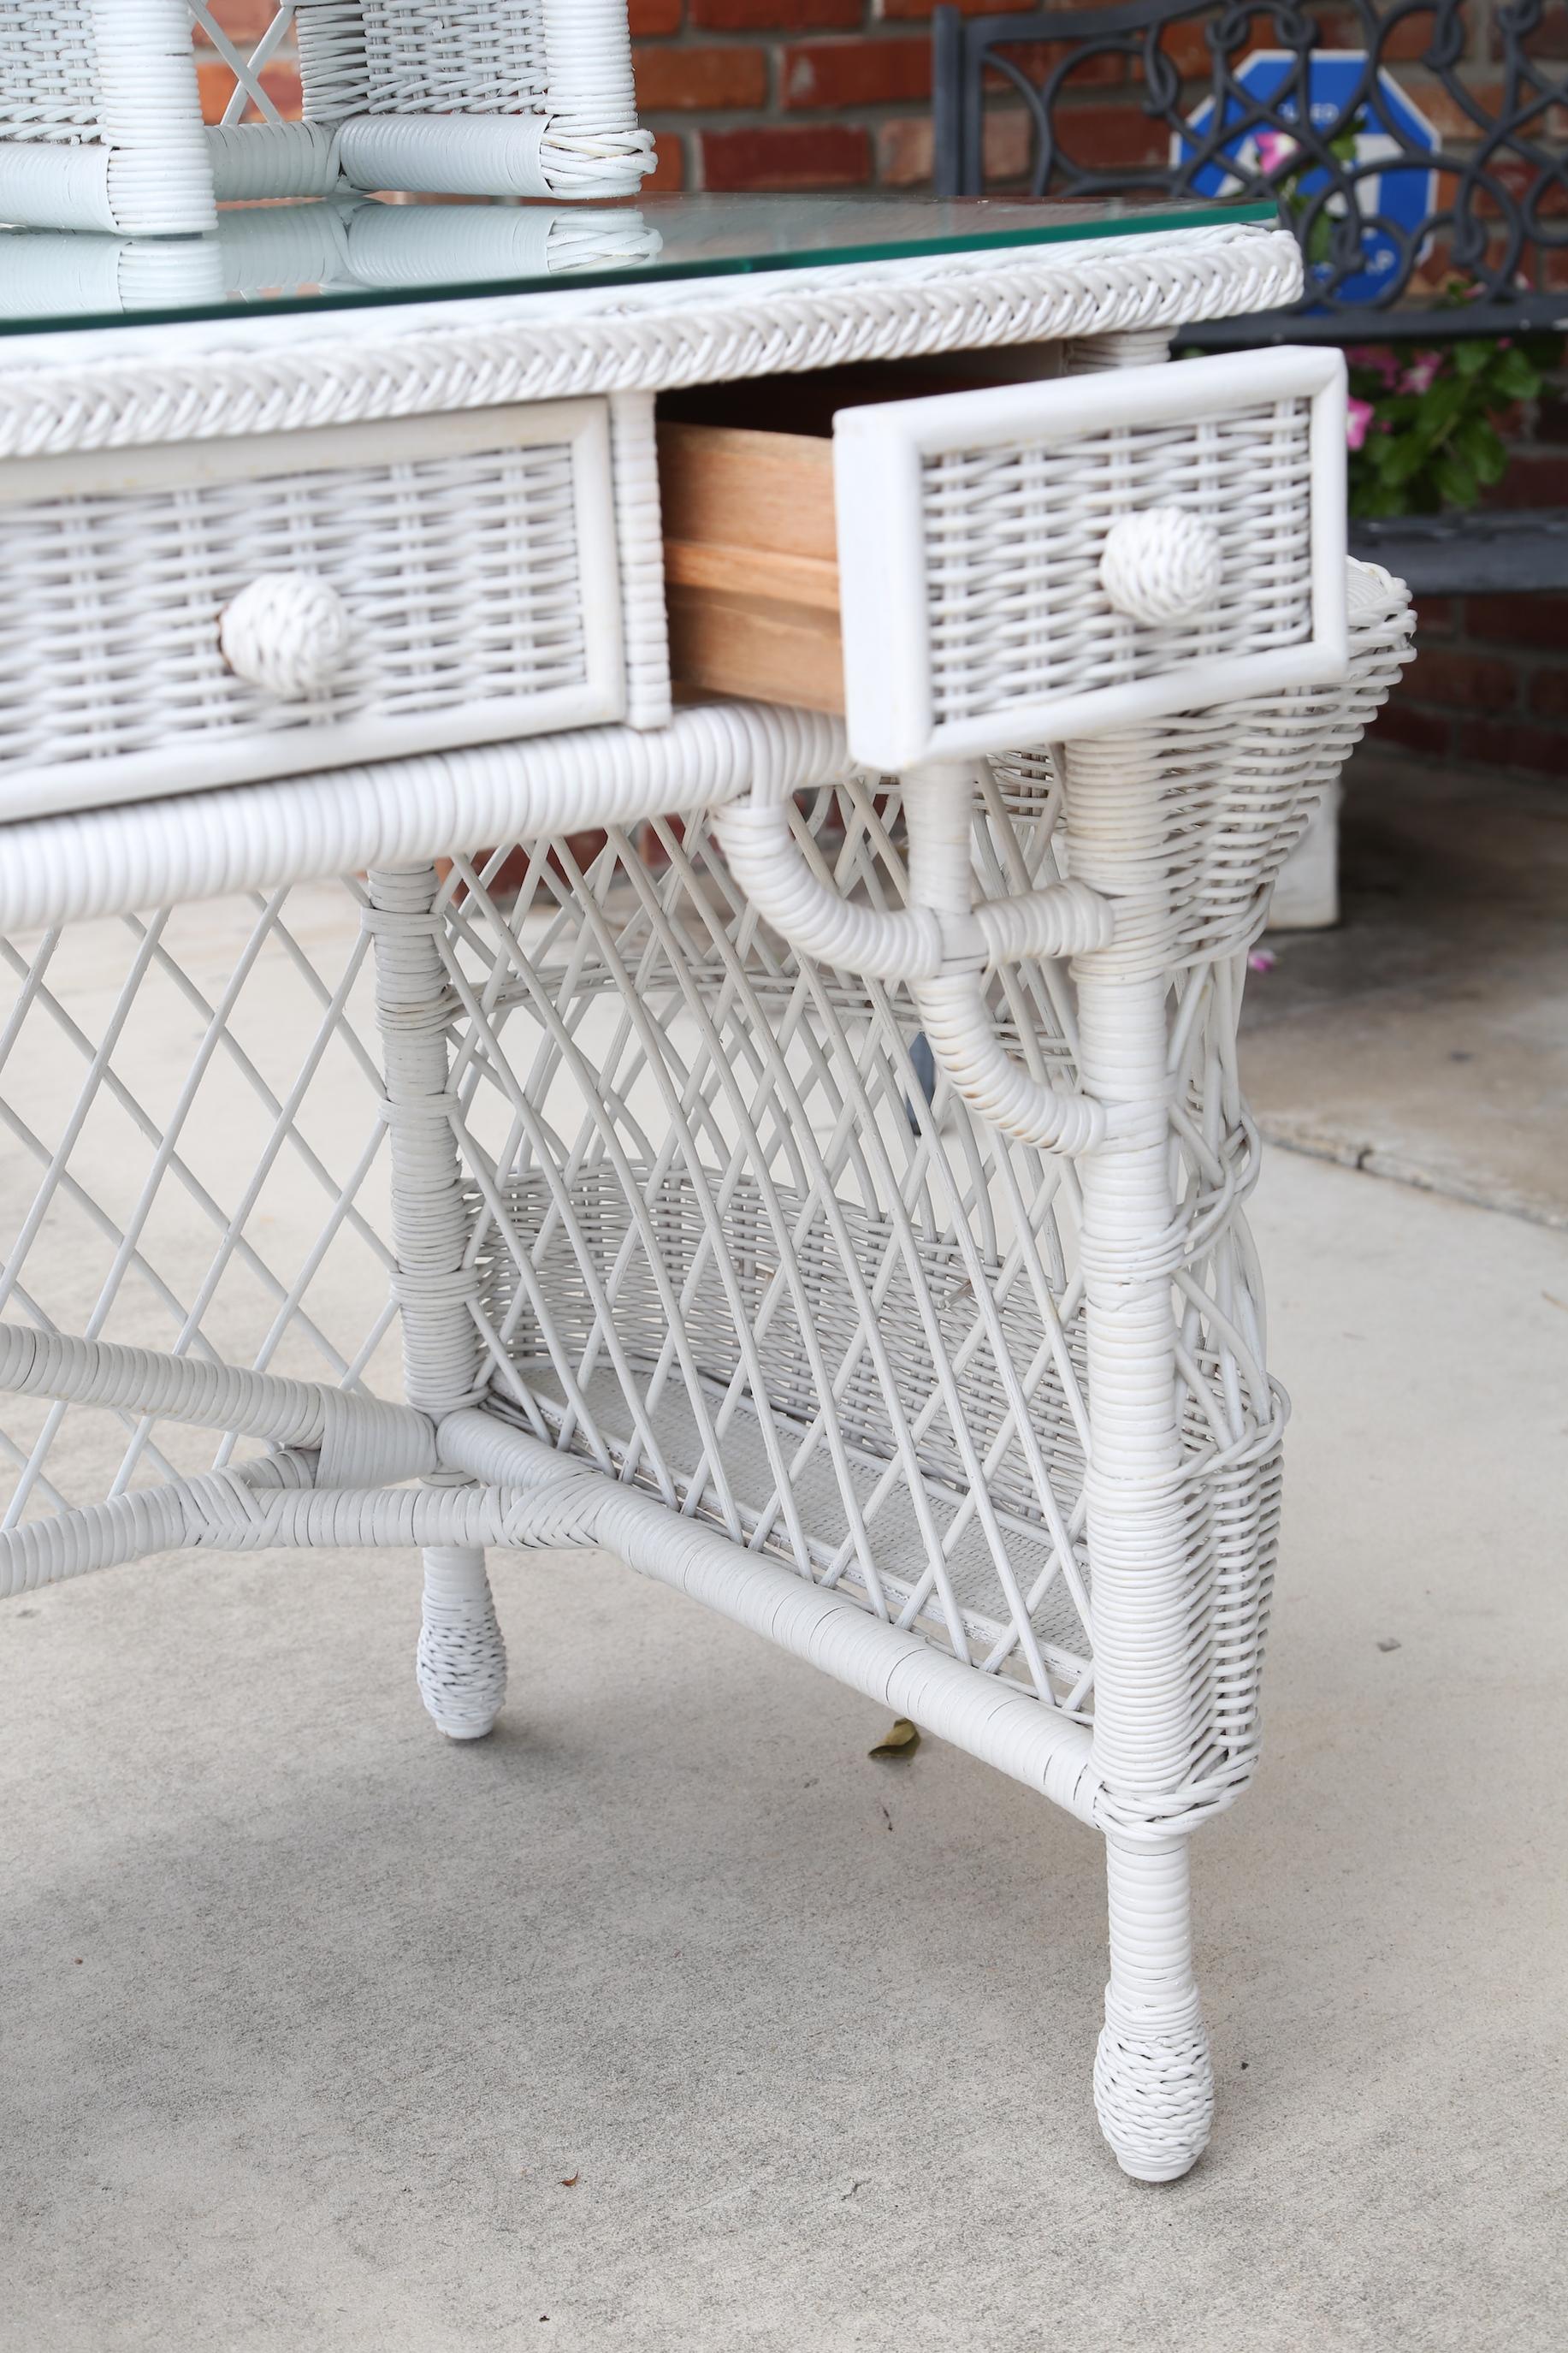 Vintage White Wicker Dressing Table & Chair 2